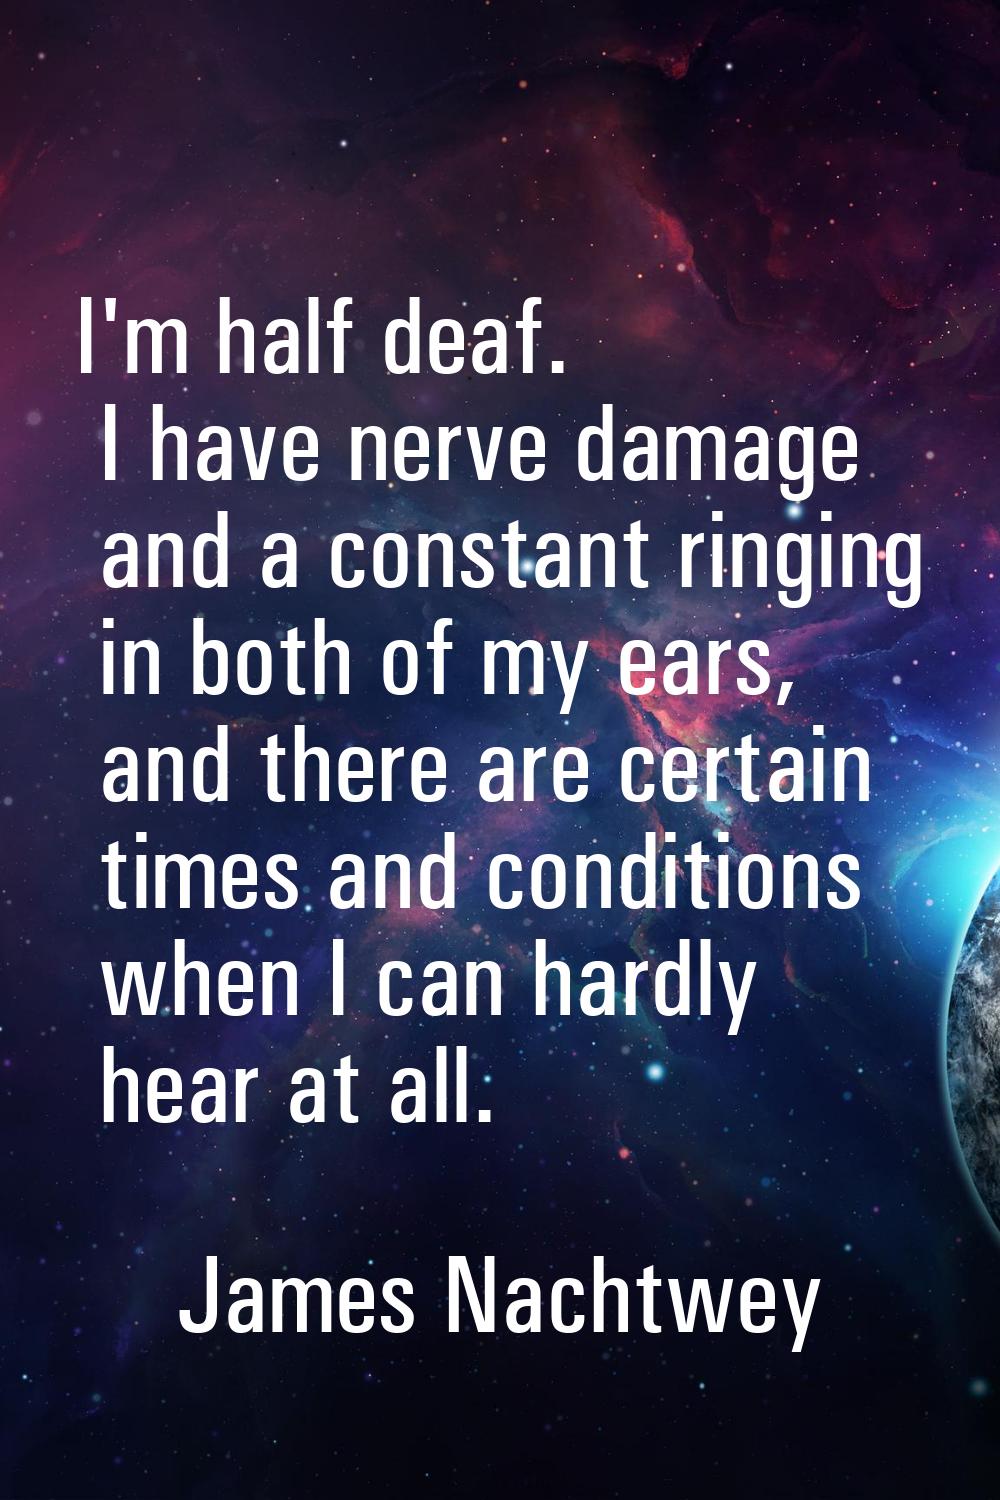 I'm half deaf. I have nerve damage and a constant ringing in both of my ears, and there are certain